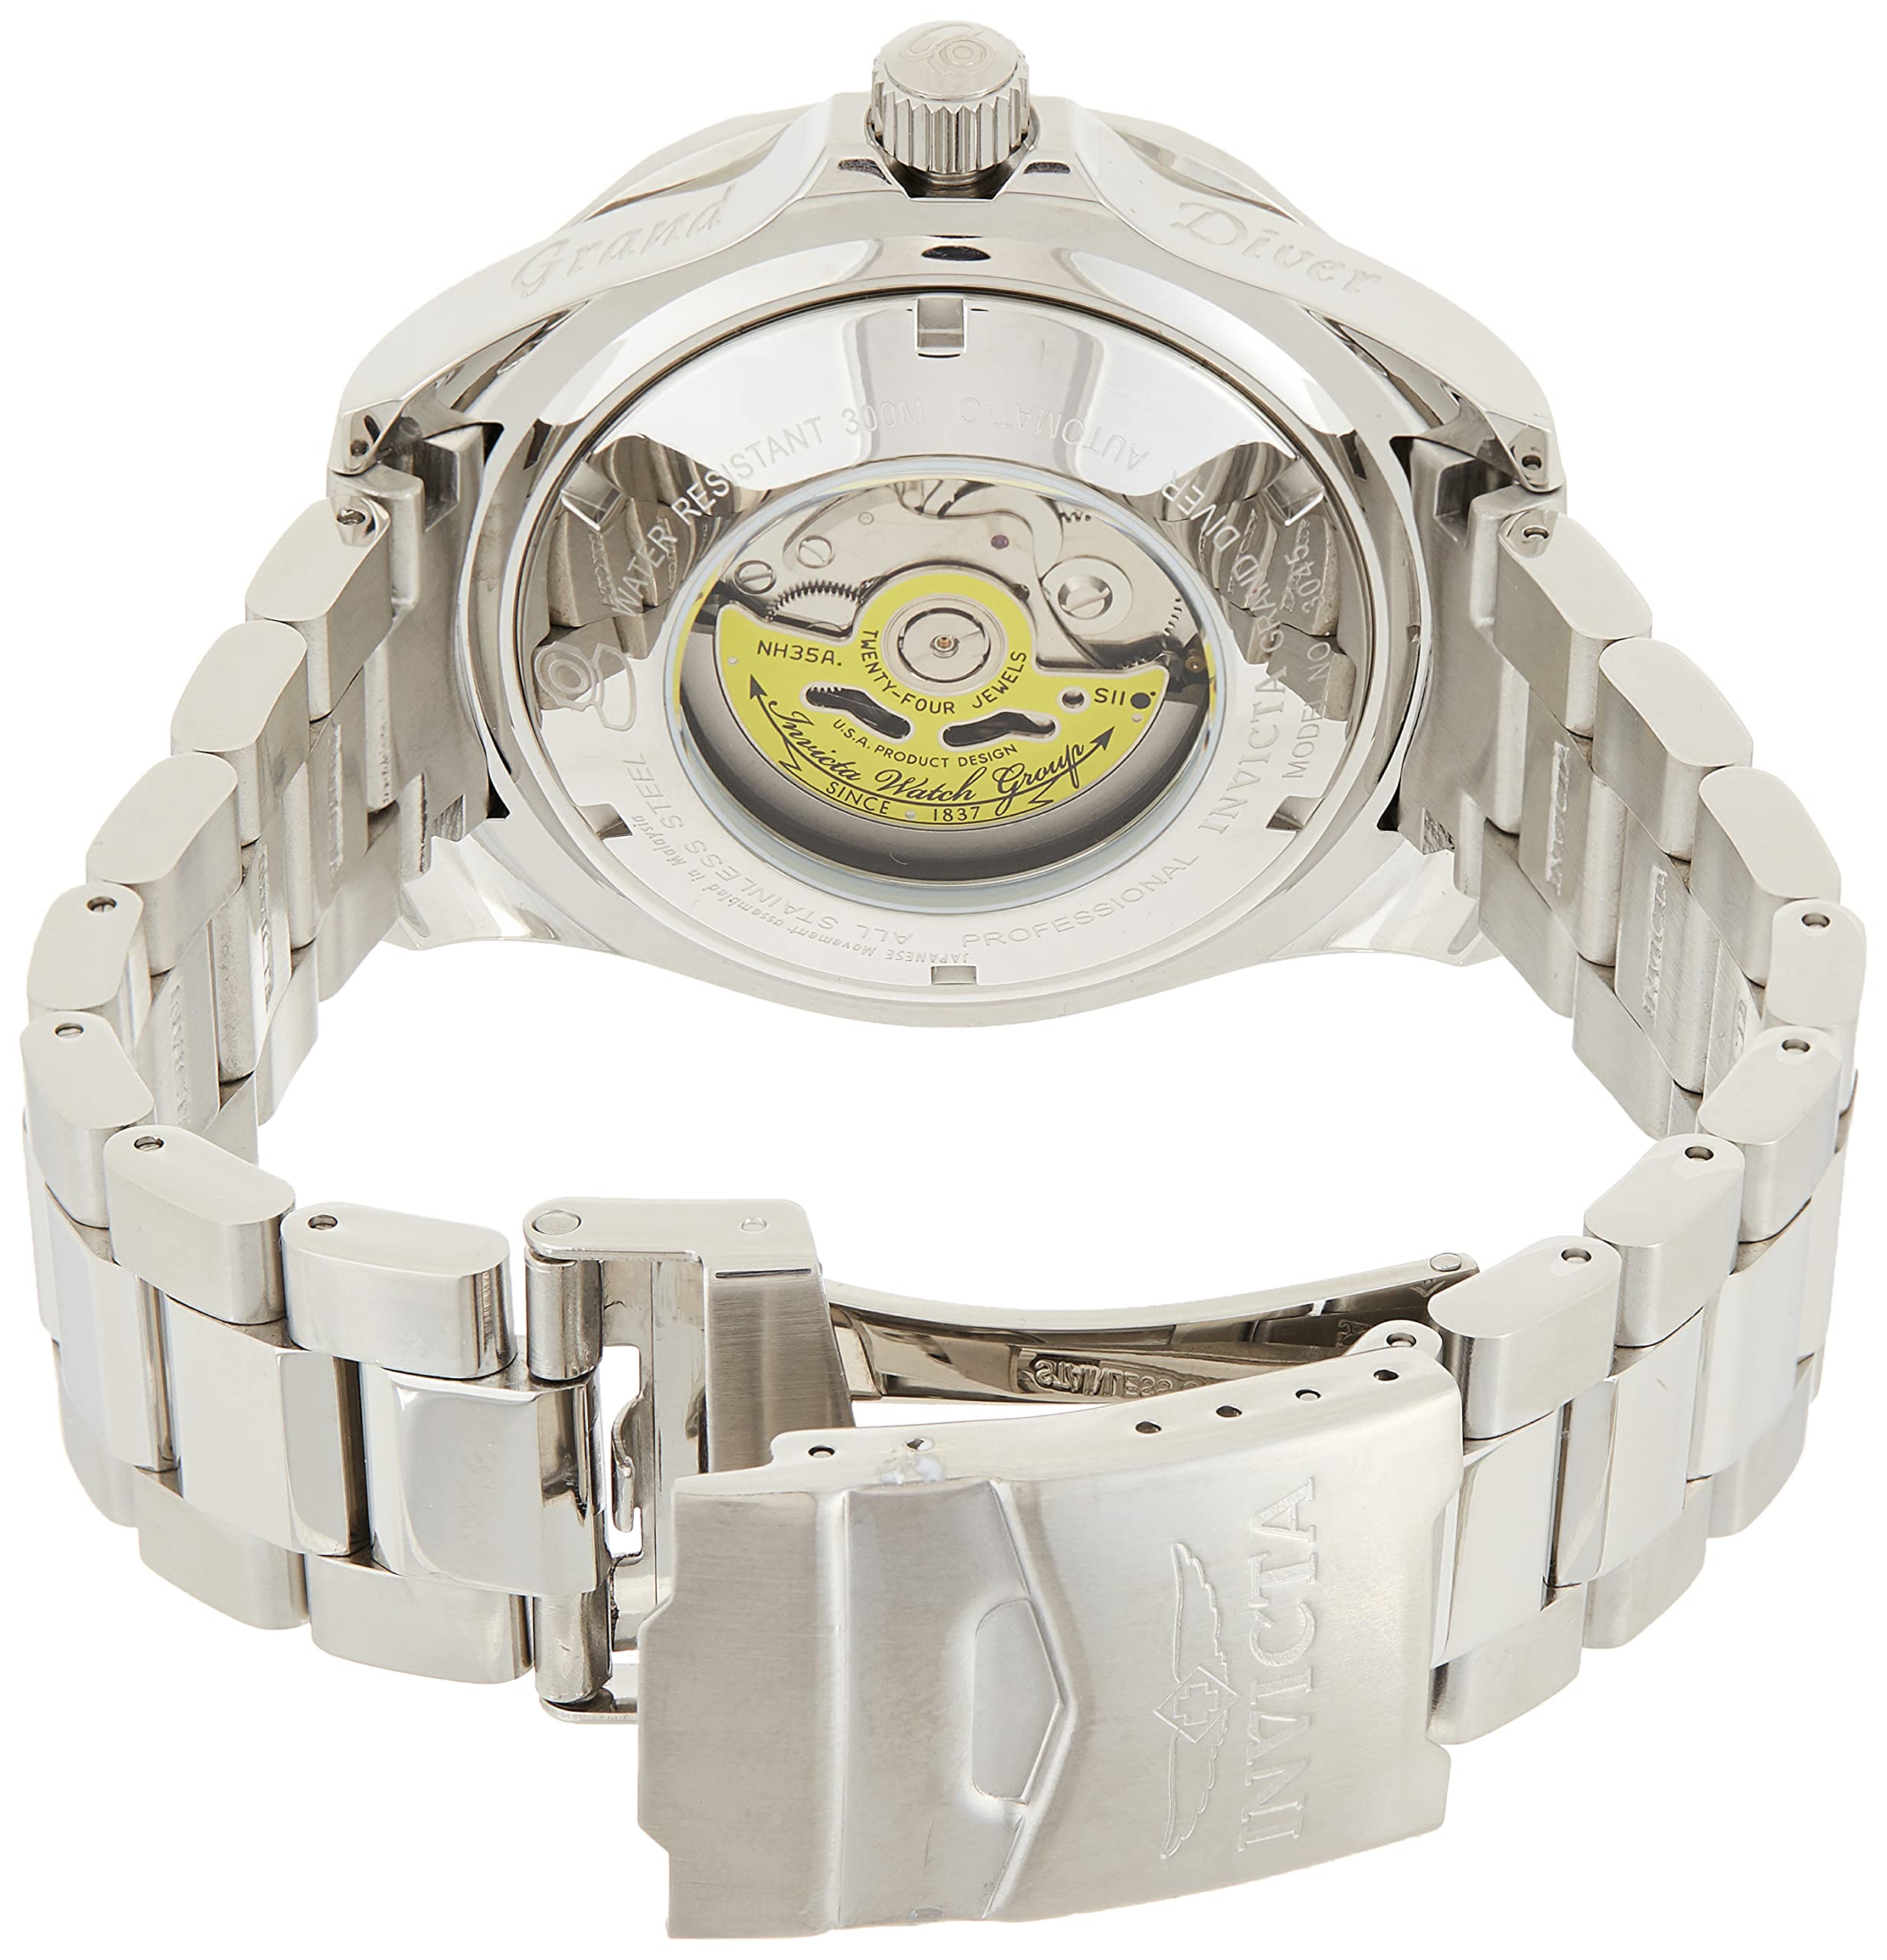 Invicta Men's INVICTA-3045 Pro-Diver Collection Grand Diver Stainless Steel Automatic Watch with Link Bracelet